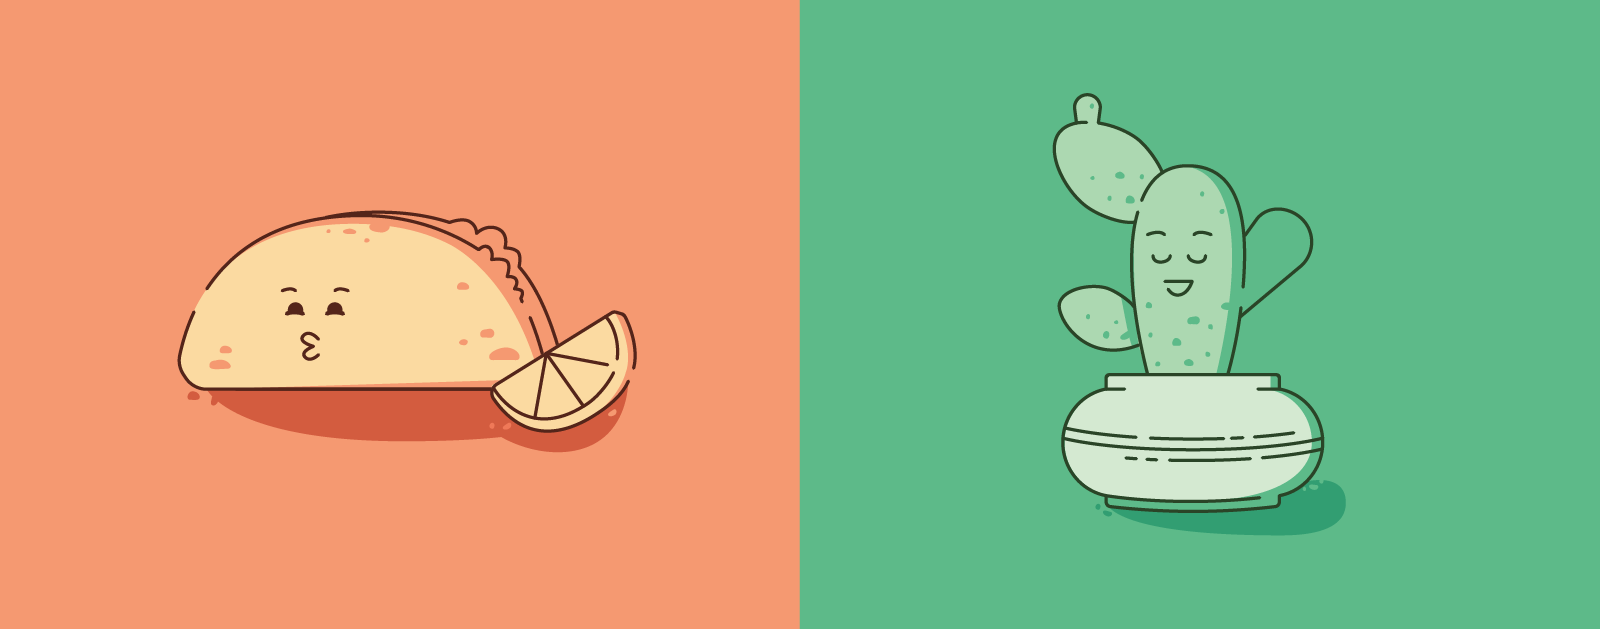 Illustration of a taco and succulent